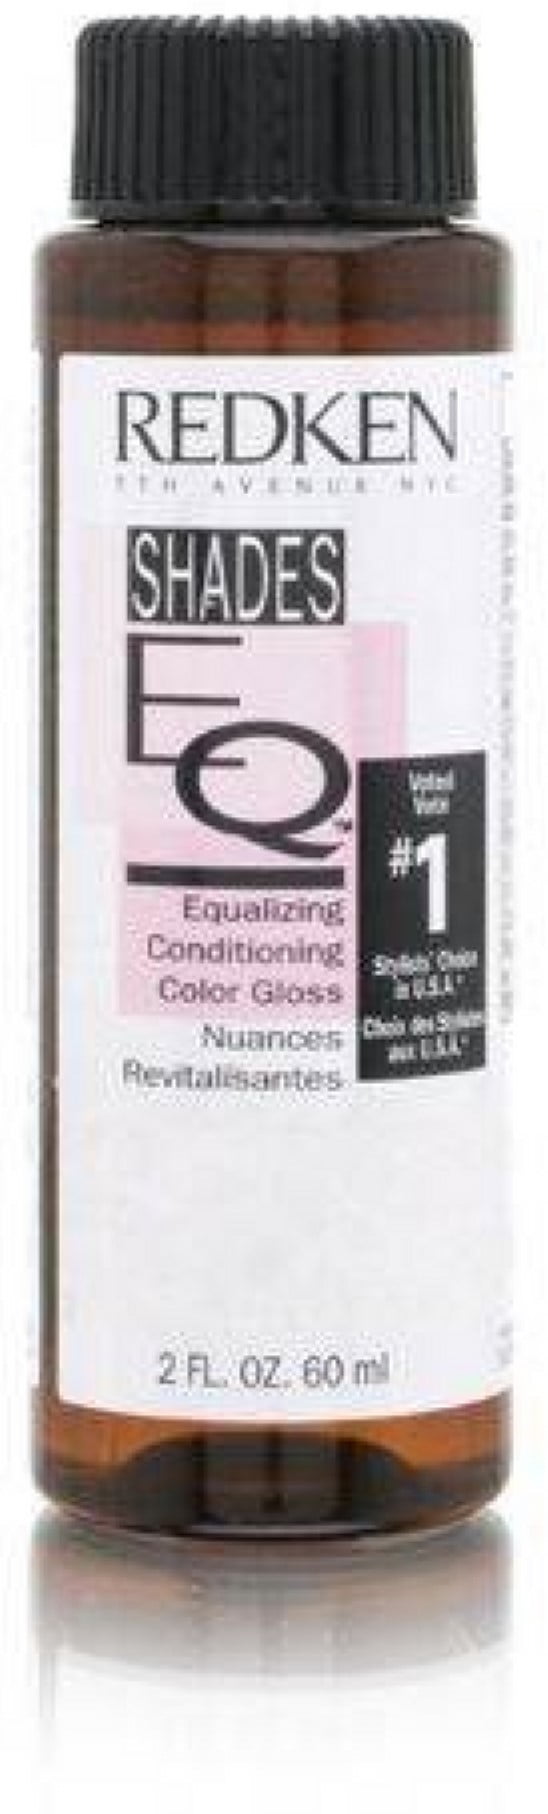 Redken Redken Shades EQ Color Gloss Hair Color for